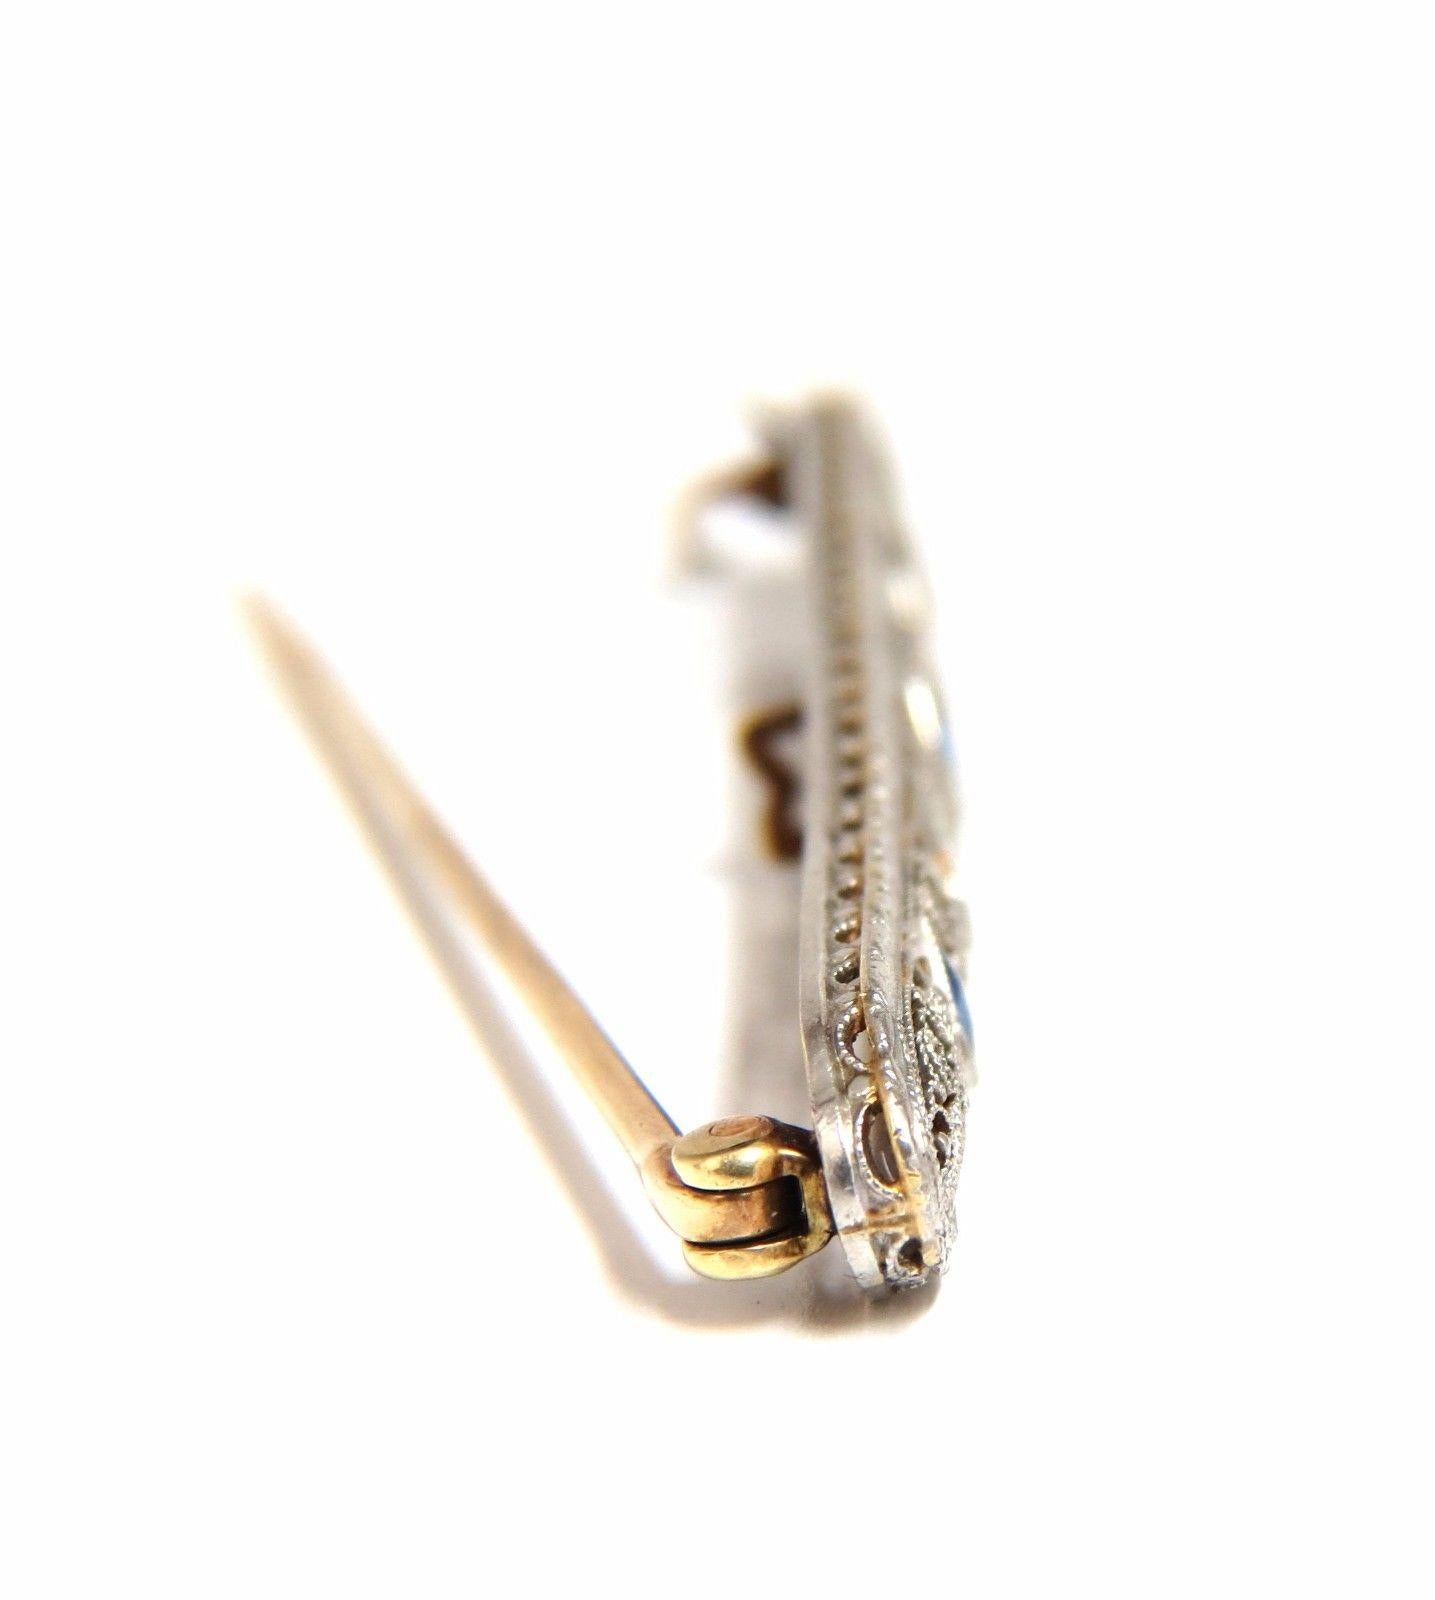 Edwardian Class.

.60ct. natural sapphires long brooch pin.

Rounds, Full cut Brilliant.

.10ct diamonds:

G-color Vs-2 Si-1 clarity.

14kt gold 

5.5 grams.

Overall: 2.7 X .28 inch

Excellent made 